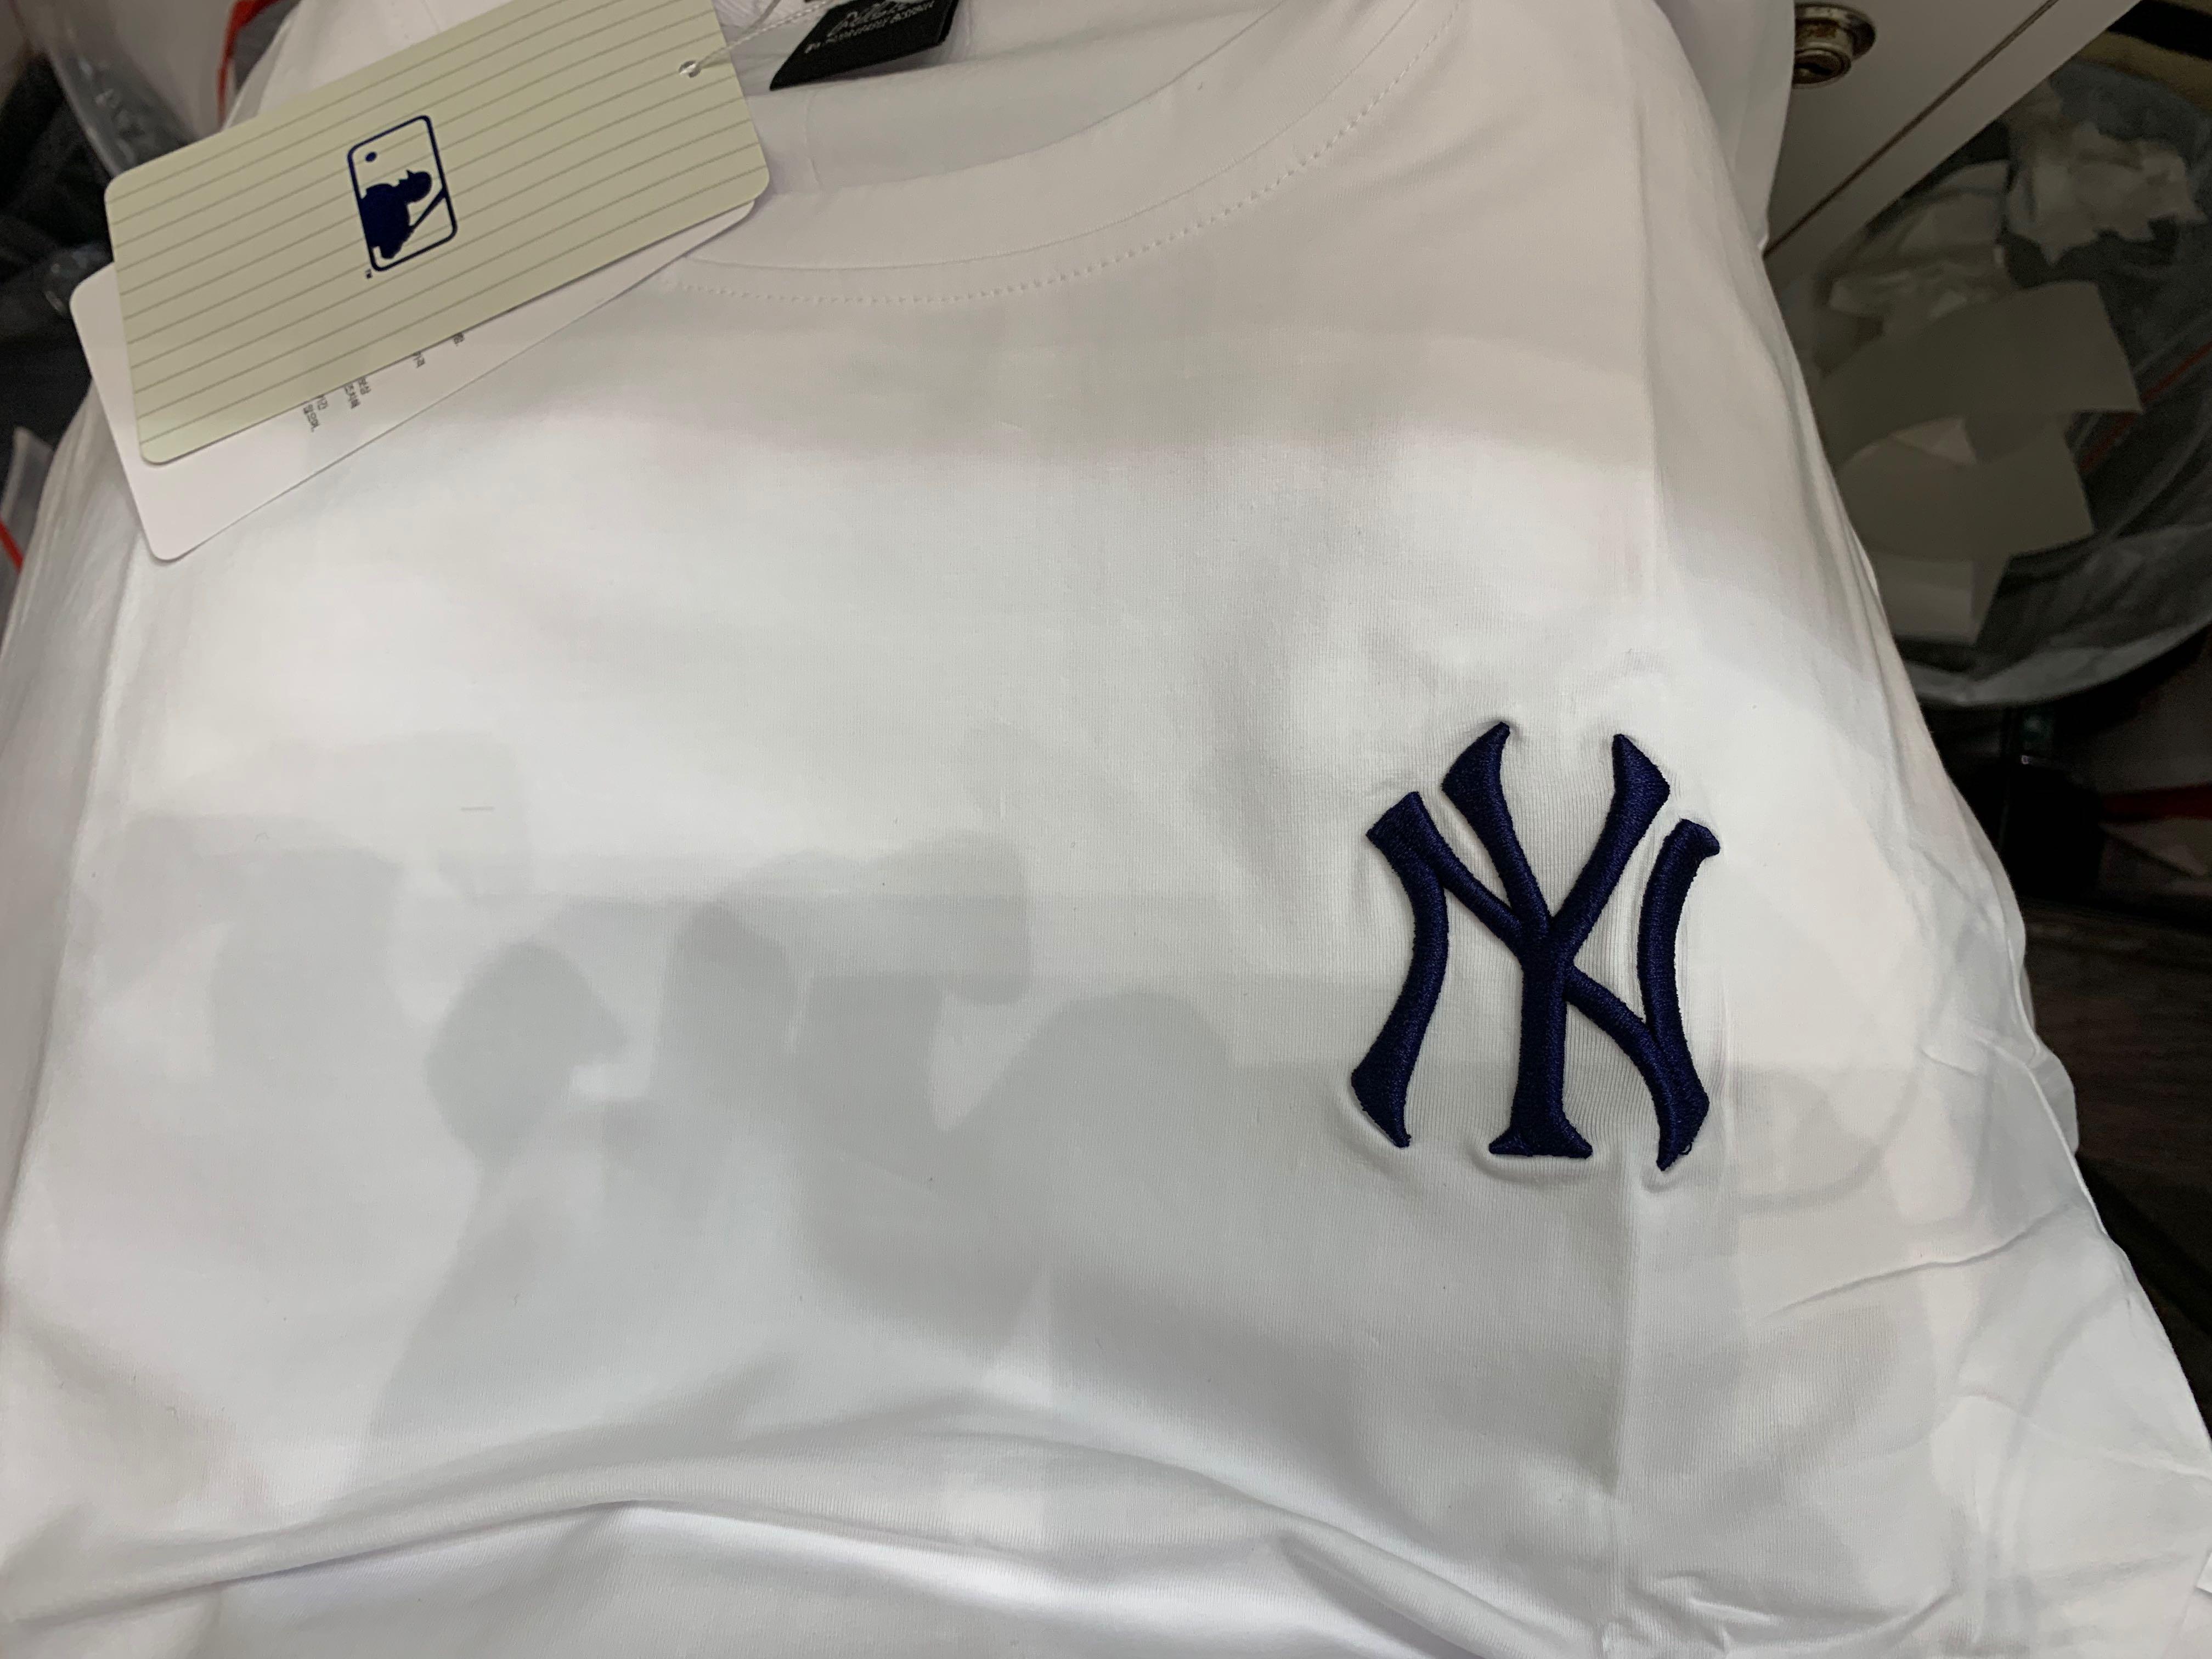 [CLEARANCE] 2 for $60 MLB Korea Embroidered Logo Cotton T-shirt